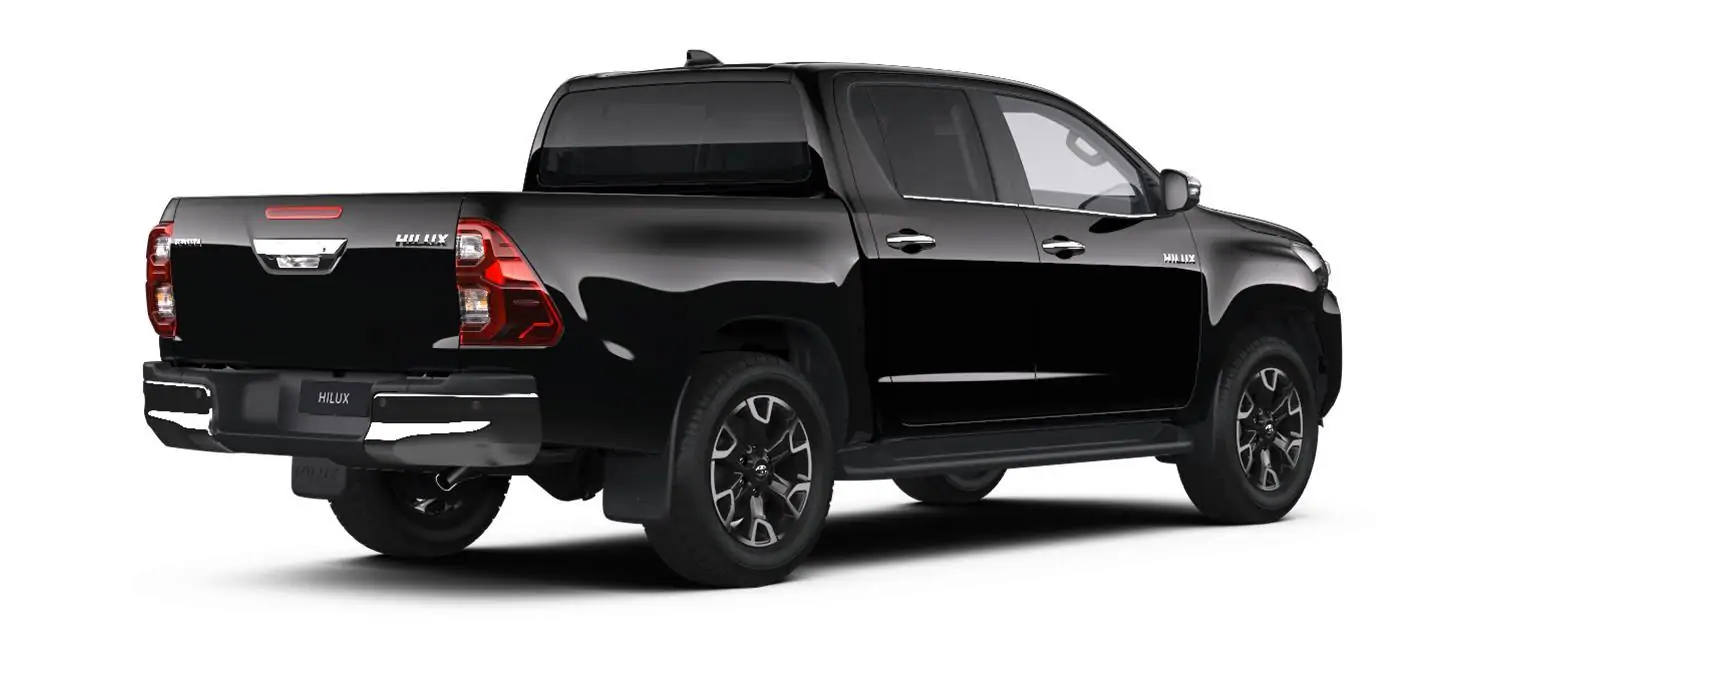 Nieuw Toyota Hilux 4x4 Double Cab 2.8 204hp 6AT Lounge LHD 218 - BLACK MICA 3